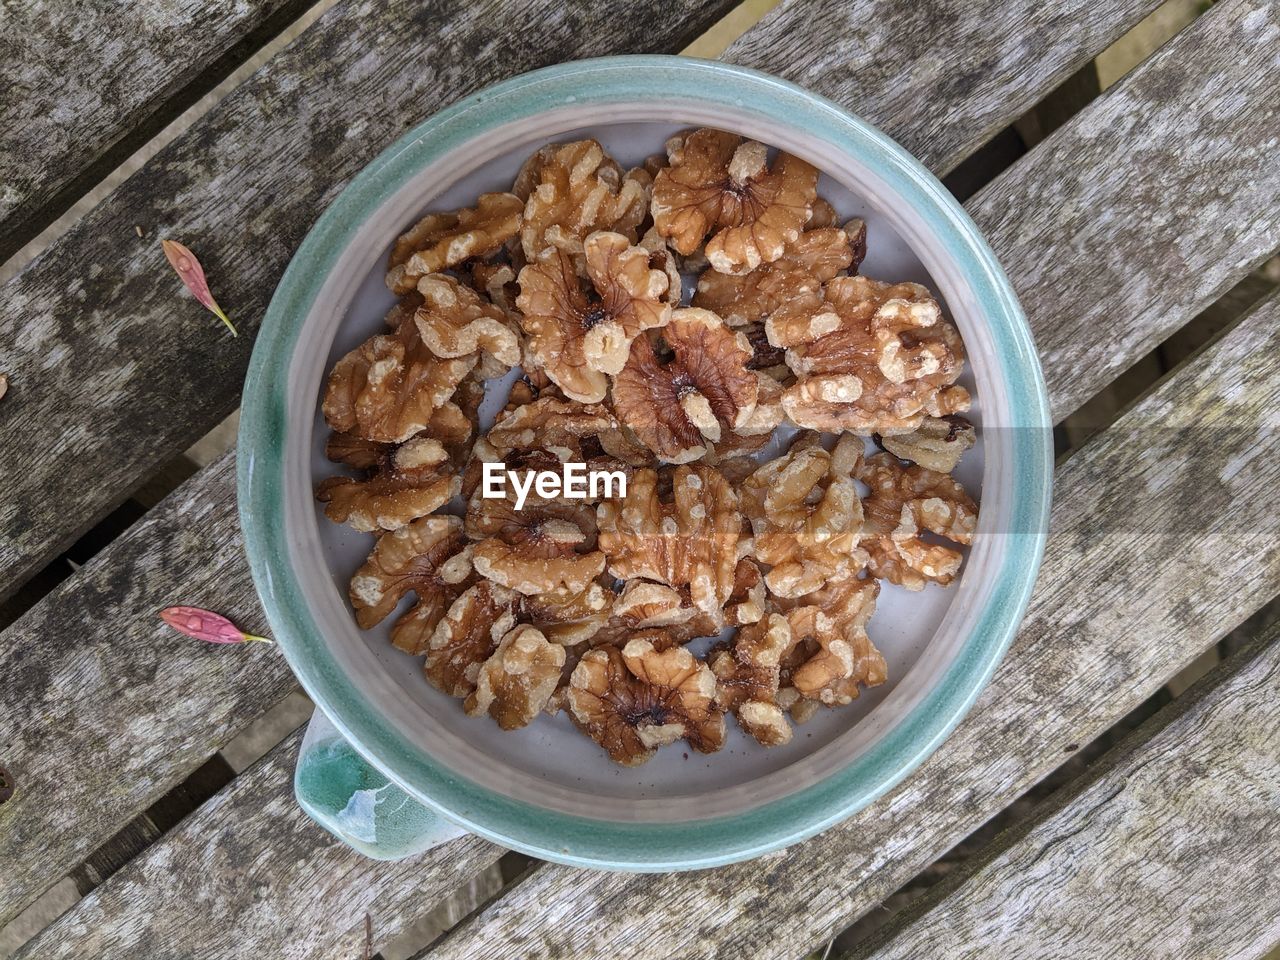 A bowl of walnuts viewed from above, lying on a wooden bench.